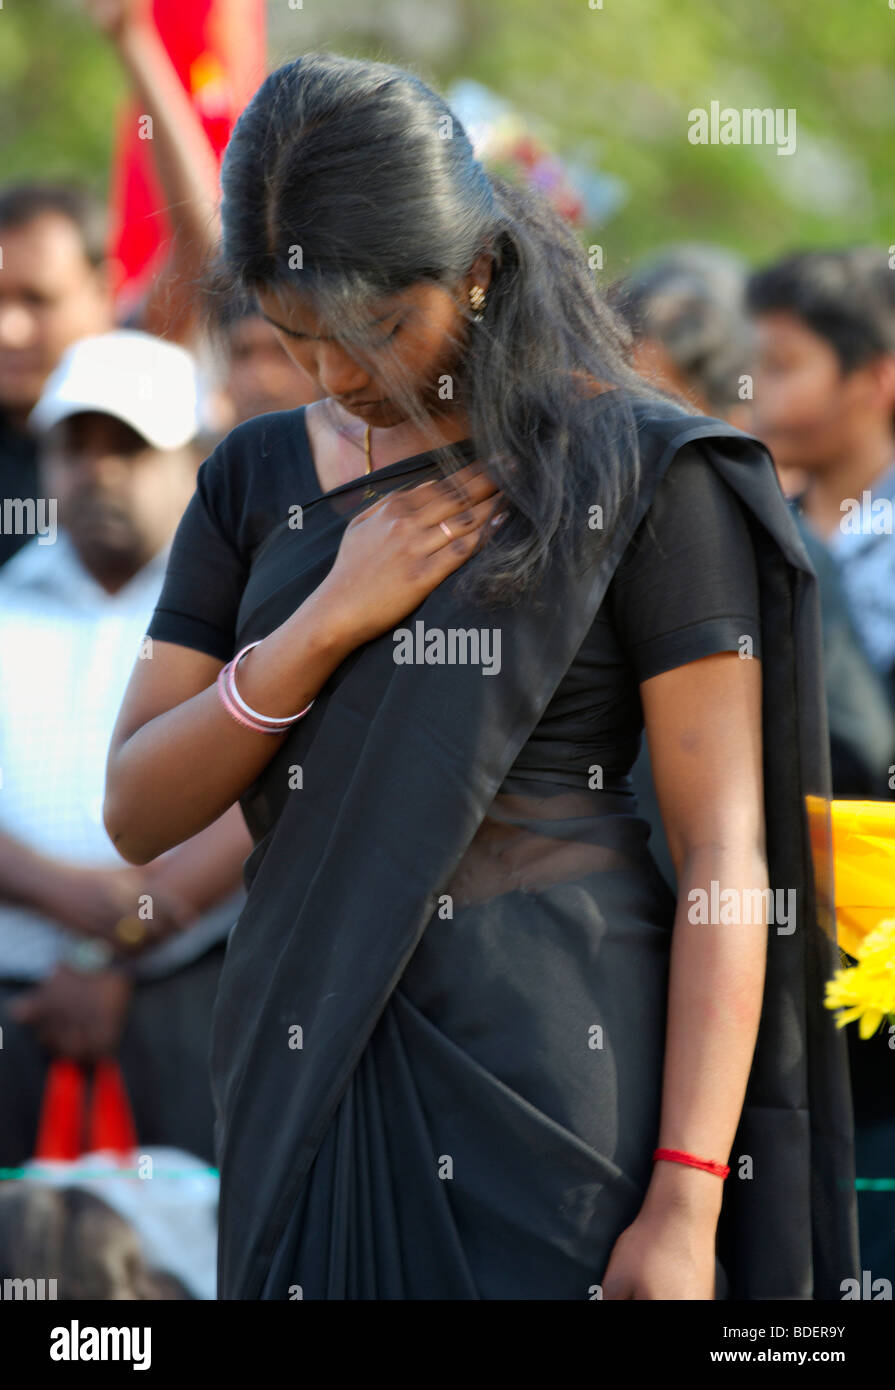 Tamil woman wearing a black sari at Tamil protest in Parliament square,  London Stock Photo - Alamy